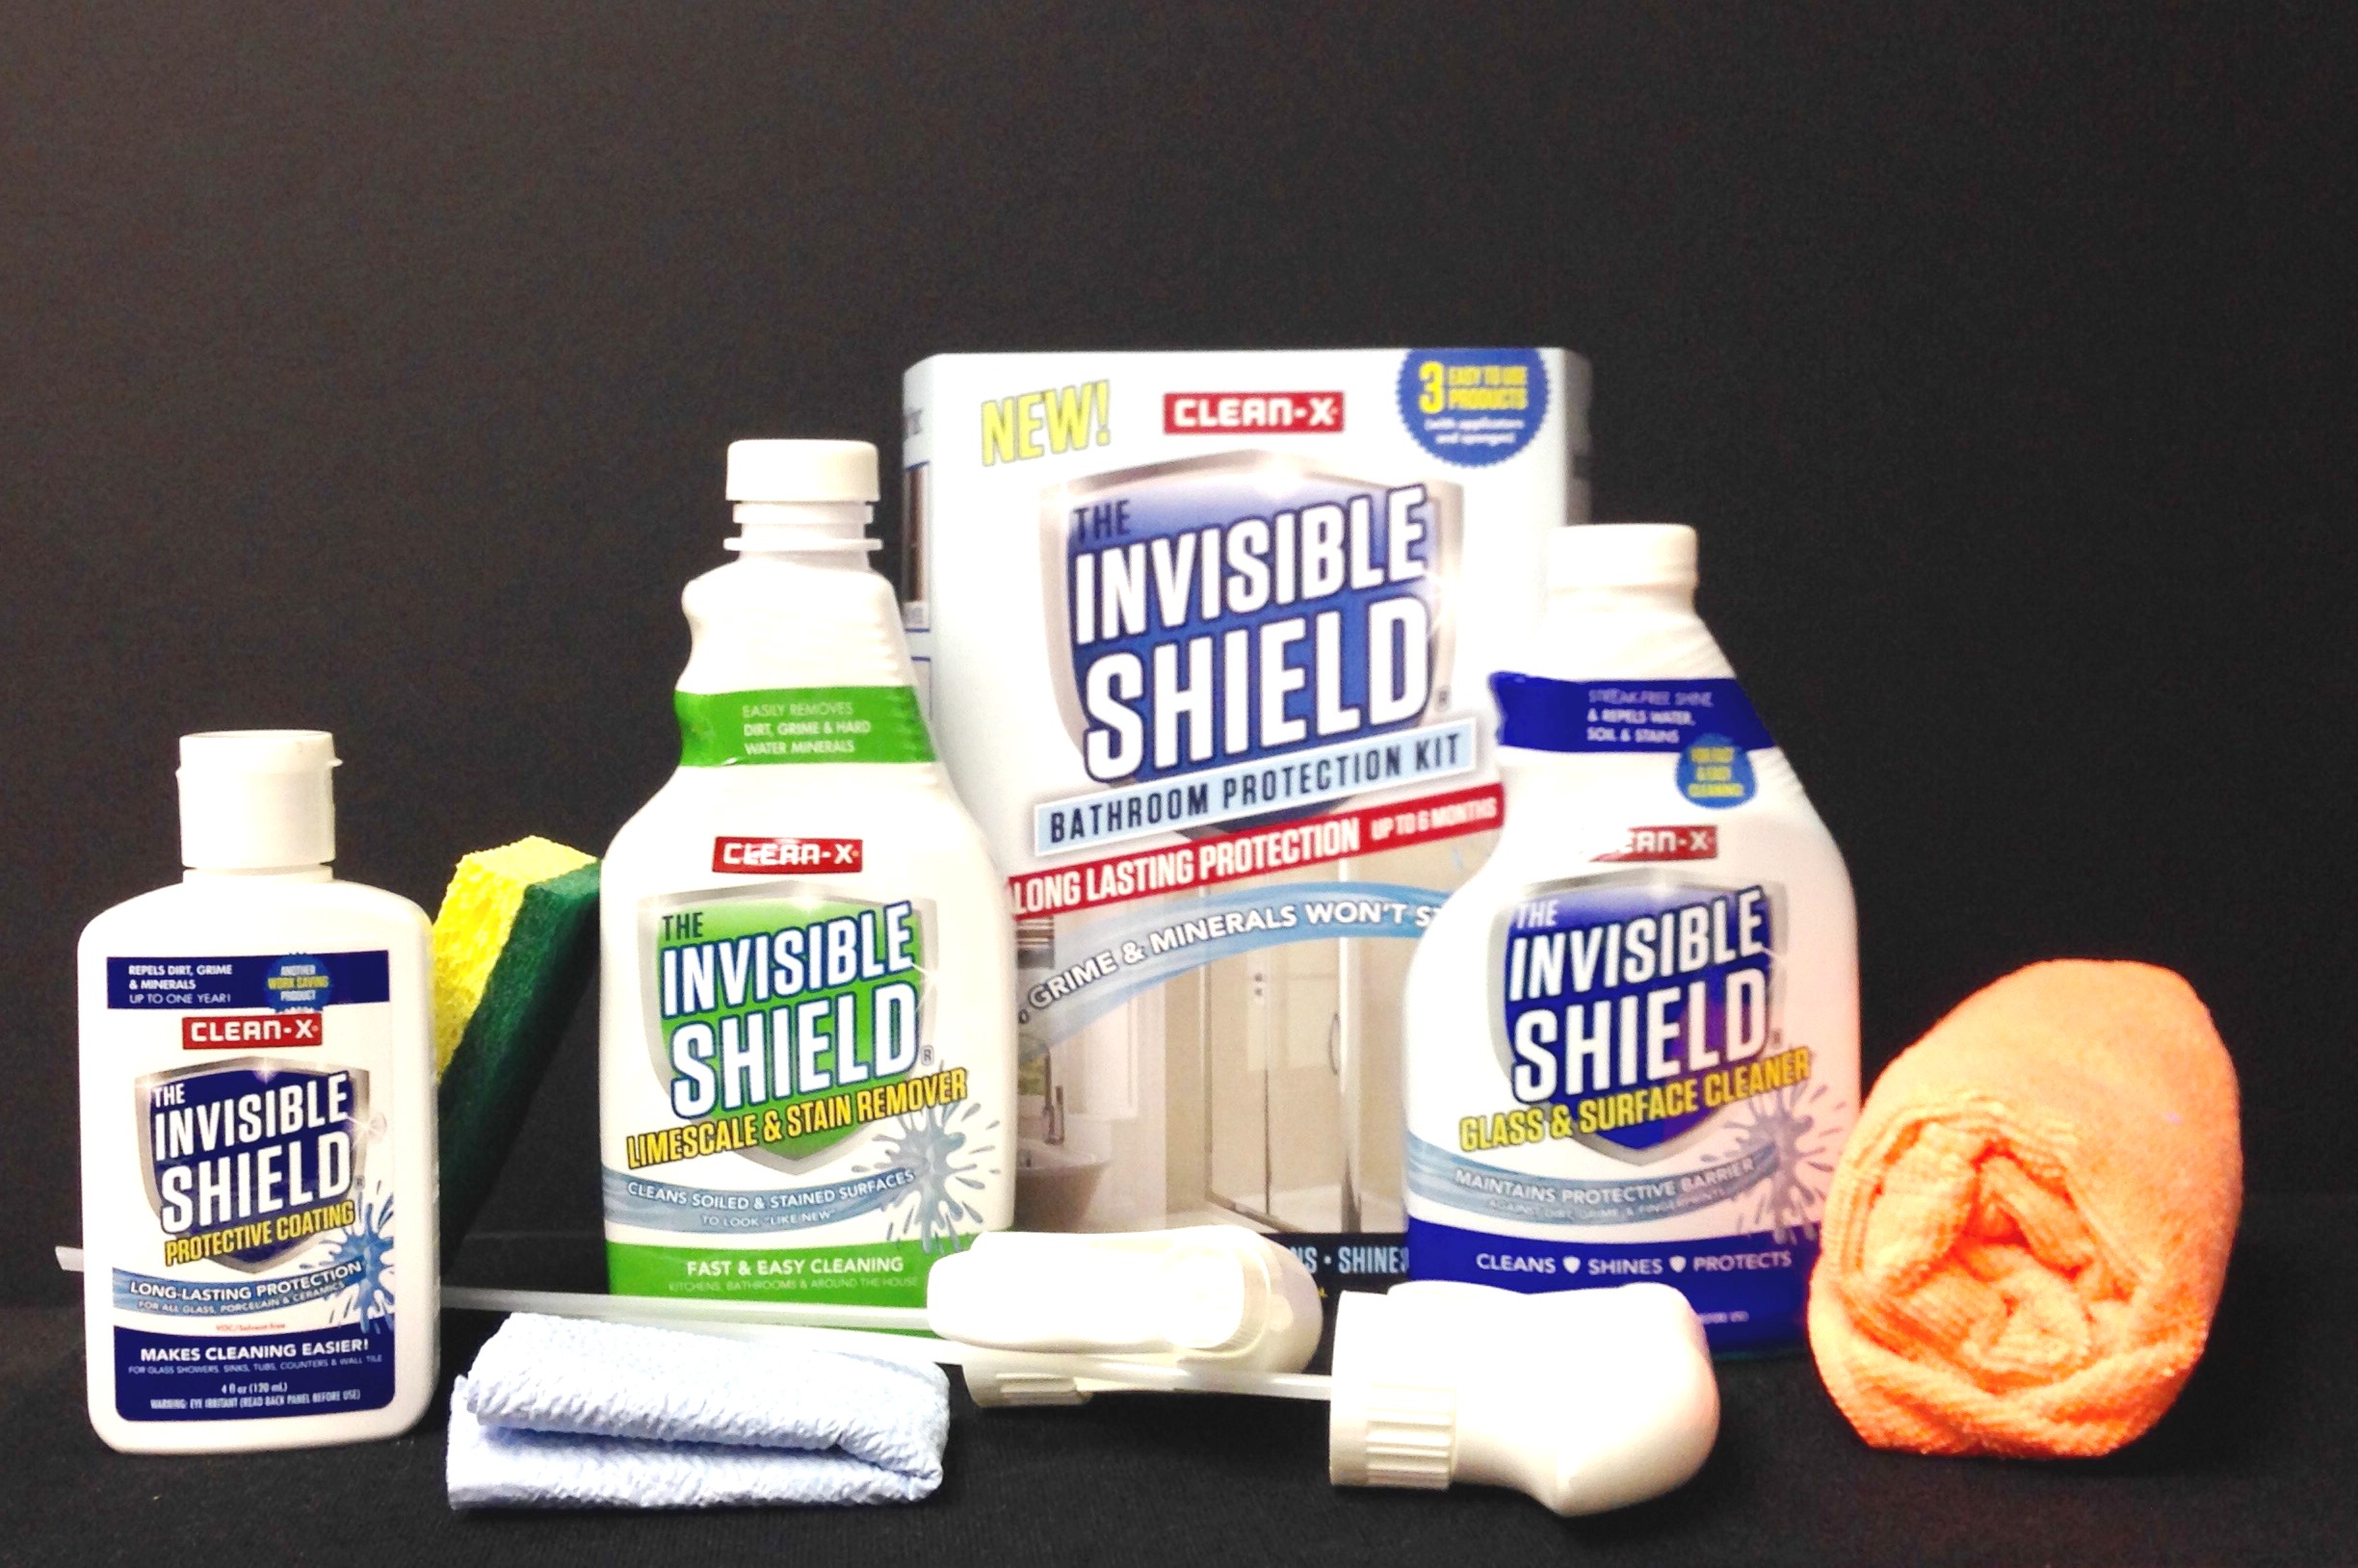 Invisible Shield "Easy Clean" Kit Components